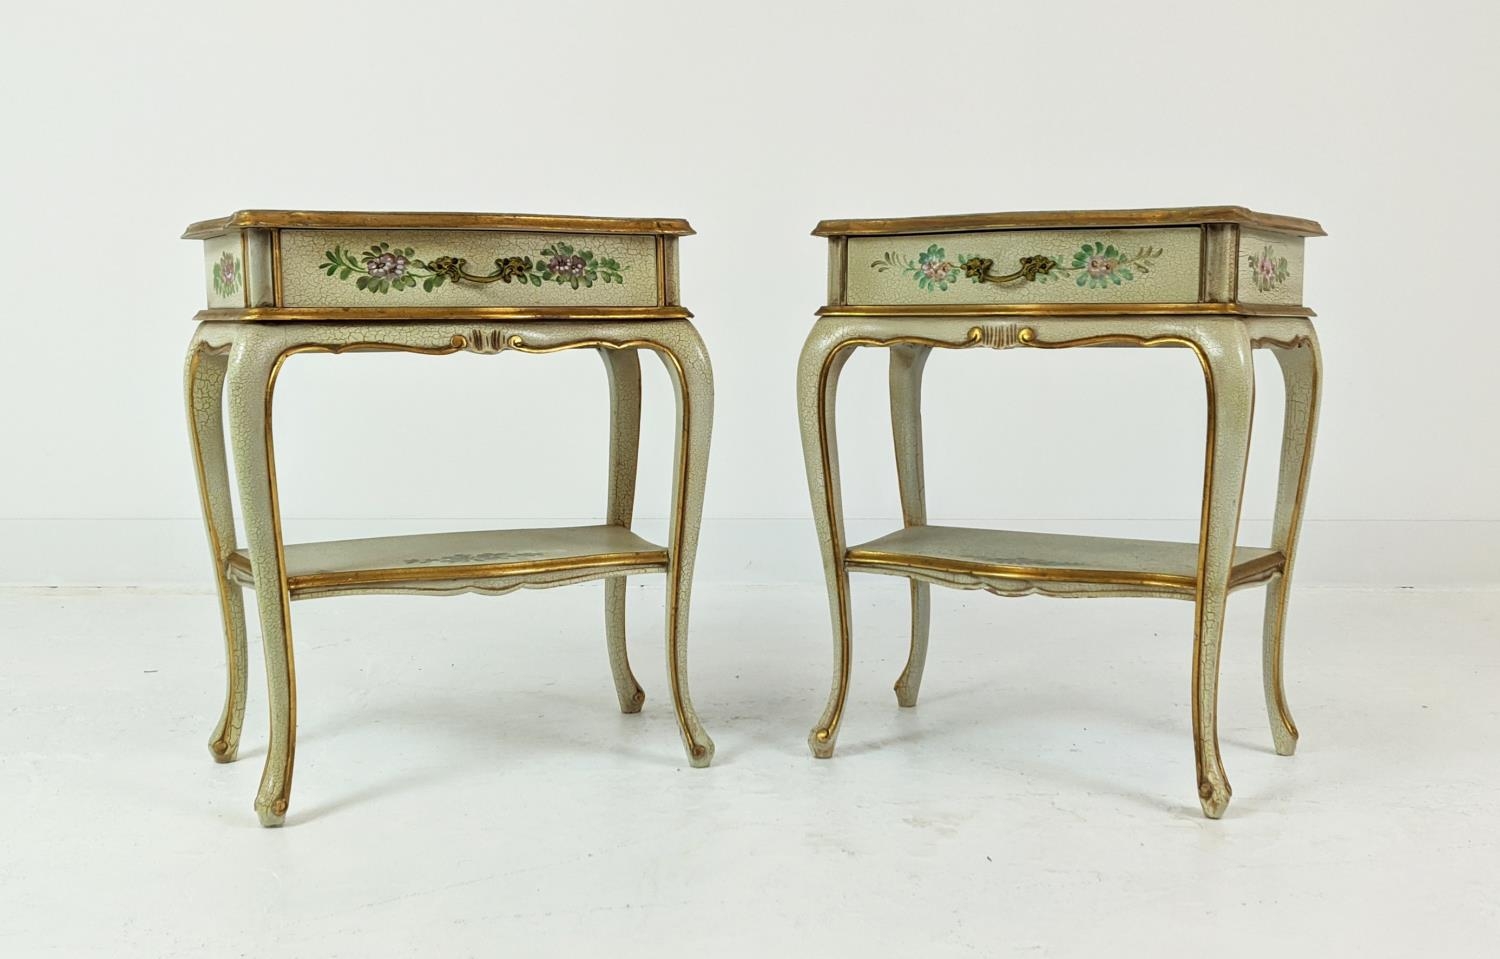 SERPENTINE BEDSIDE TABLES, Italianate craquelure, floral painted and gilt heightened, each with - Image 2 of 7